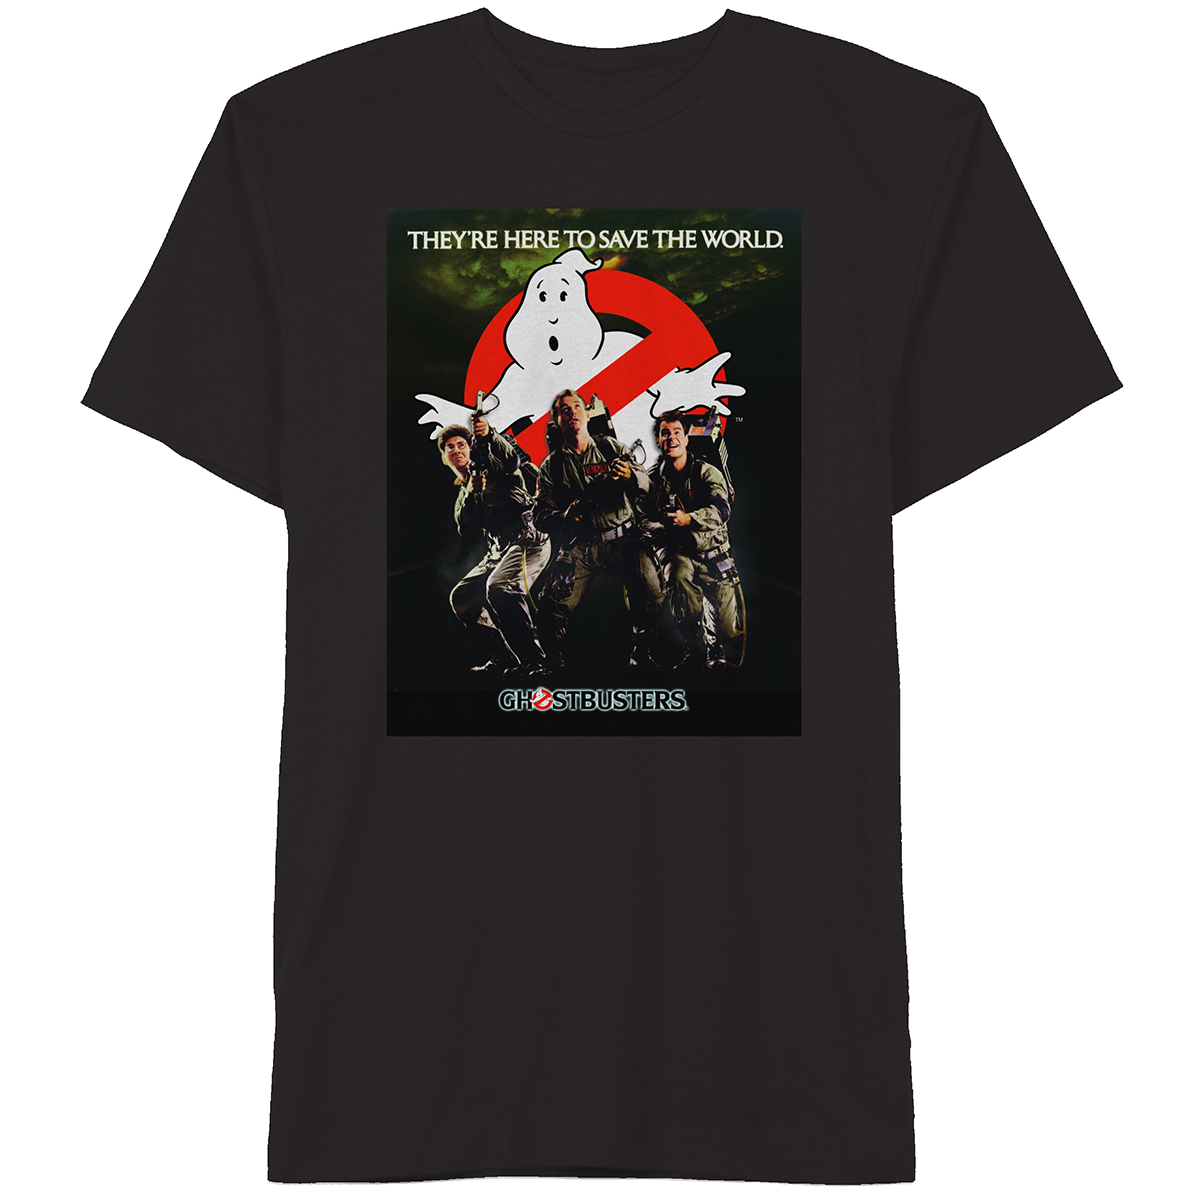 Hybrid Young Men's Ghostbusters Short-Sleeve Graphic Tee